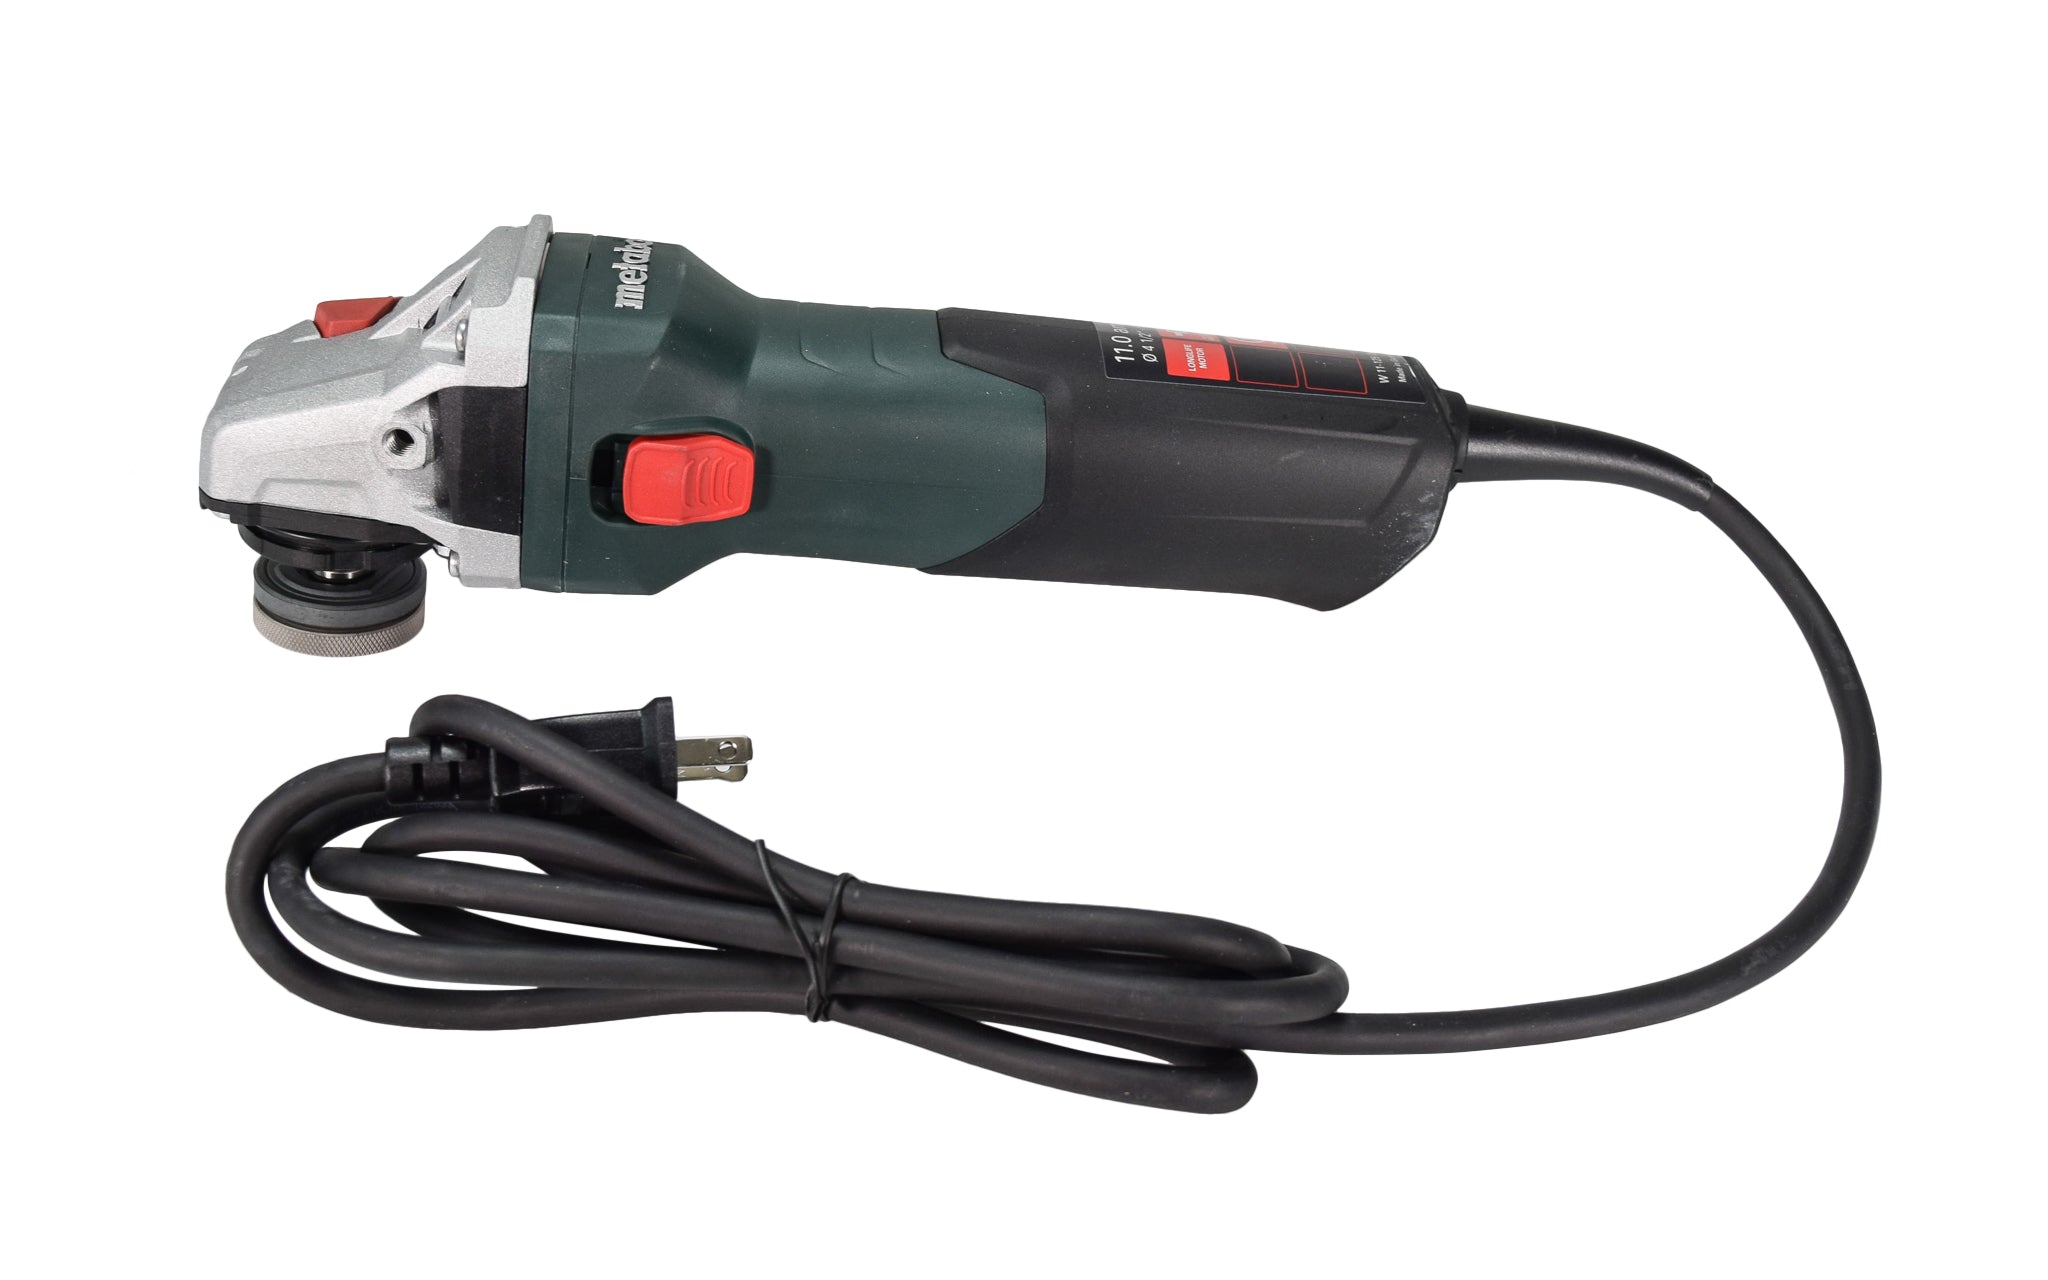 Metabo-603623420-4.5-inch-5-inch-Angle-Grinder-11-000-Rpm-11.0-Amps-with-Lock-on-image-2